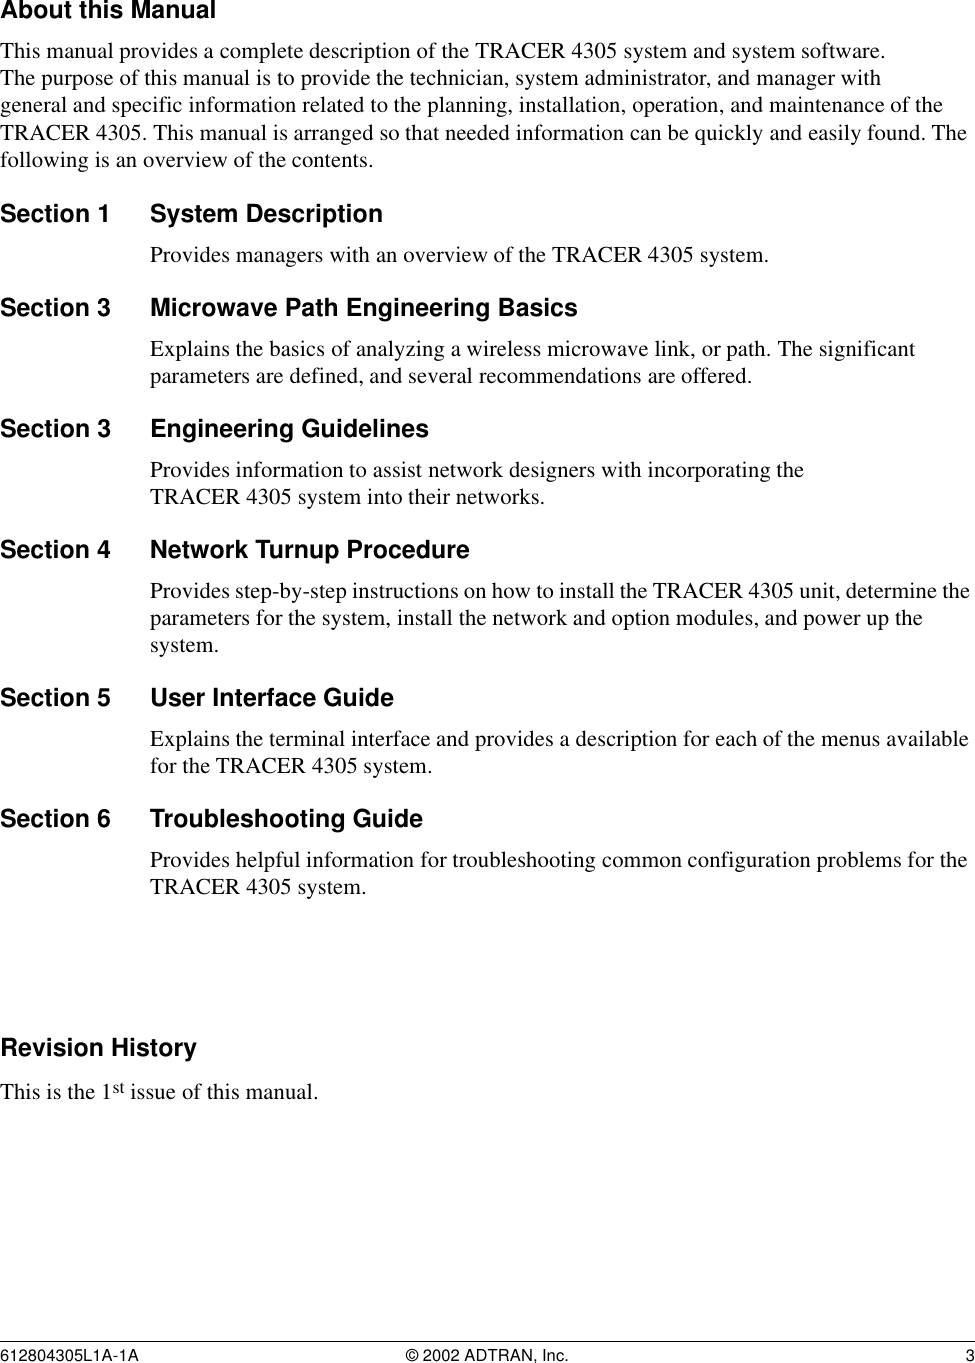 612804305L1A-1A © 2002 ADTRAN, Inc. 3About this ManualThis manual provides a complete description of the TRACER 4305 system and system software. The purpose of this manual is to provide the technician, system administrator, and manager with general and specific information related to the planning, installation, operation, and maintenance of the TRACER 4305. This manual is arranged so that needed information can be quickly and easily found. The following is an overview of the contents.Section 1 System DescriptionProvides managers with an overview of the TRACER 4305 system.Section 3 Microwave Path Engineering BasicsExplains the basics of analyzing a wireless microwave link, or path. The significant parameters are defined, and several recommendations are offered.Section 3 Engineering GuidelinesProvides information to assist network designers with incorporating the TRACER 4305 system into their networks.Section 4 Network Turnup ProcedureProvides step-by-step instructions on how to install the TRACER 4305 unit, determine the parameters for the system, install the network and option modules, and power up the system.Section 5 User Interface Guide Explains the terminal interface and provides a description for each of the menus available for the TRACER 4305 system.Section 6 Troubleshooting GuideProvides helpful information for troubleshooting common configuration problems for the TRACER 4305 system.Revision HistoryThis is the 1st issue of this manual.